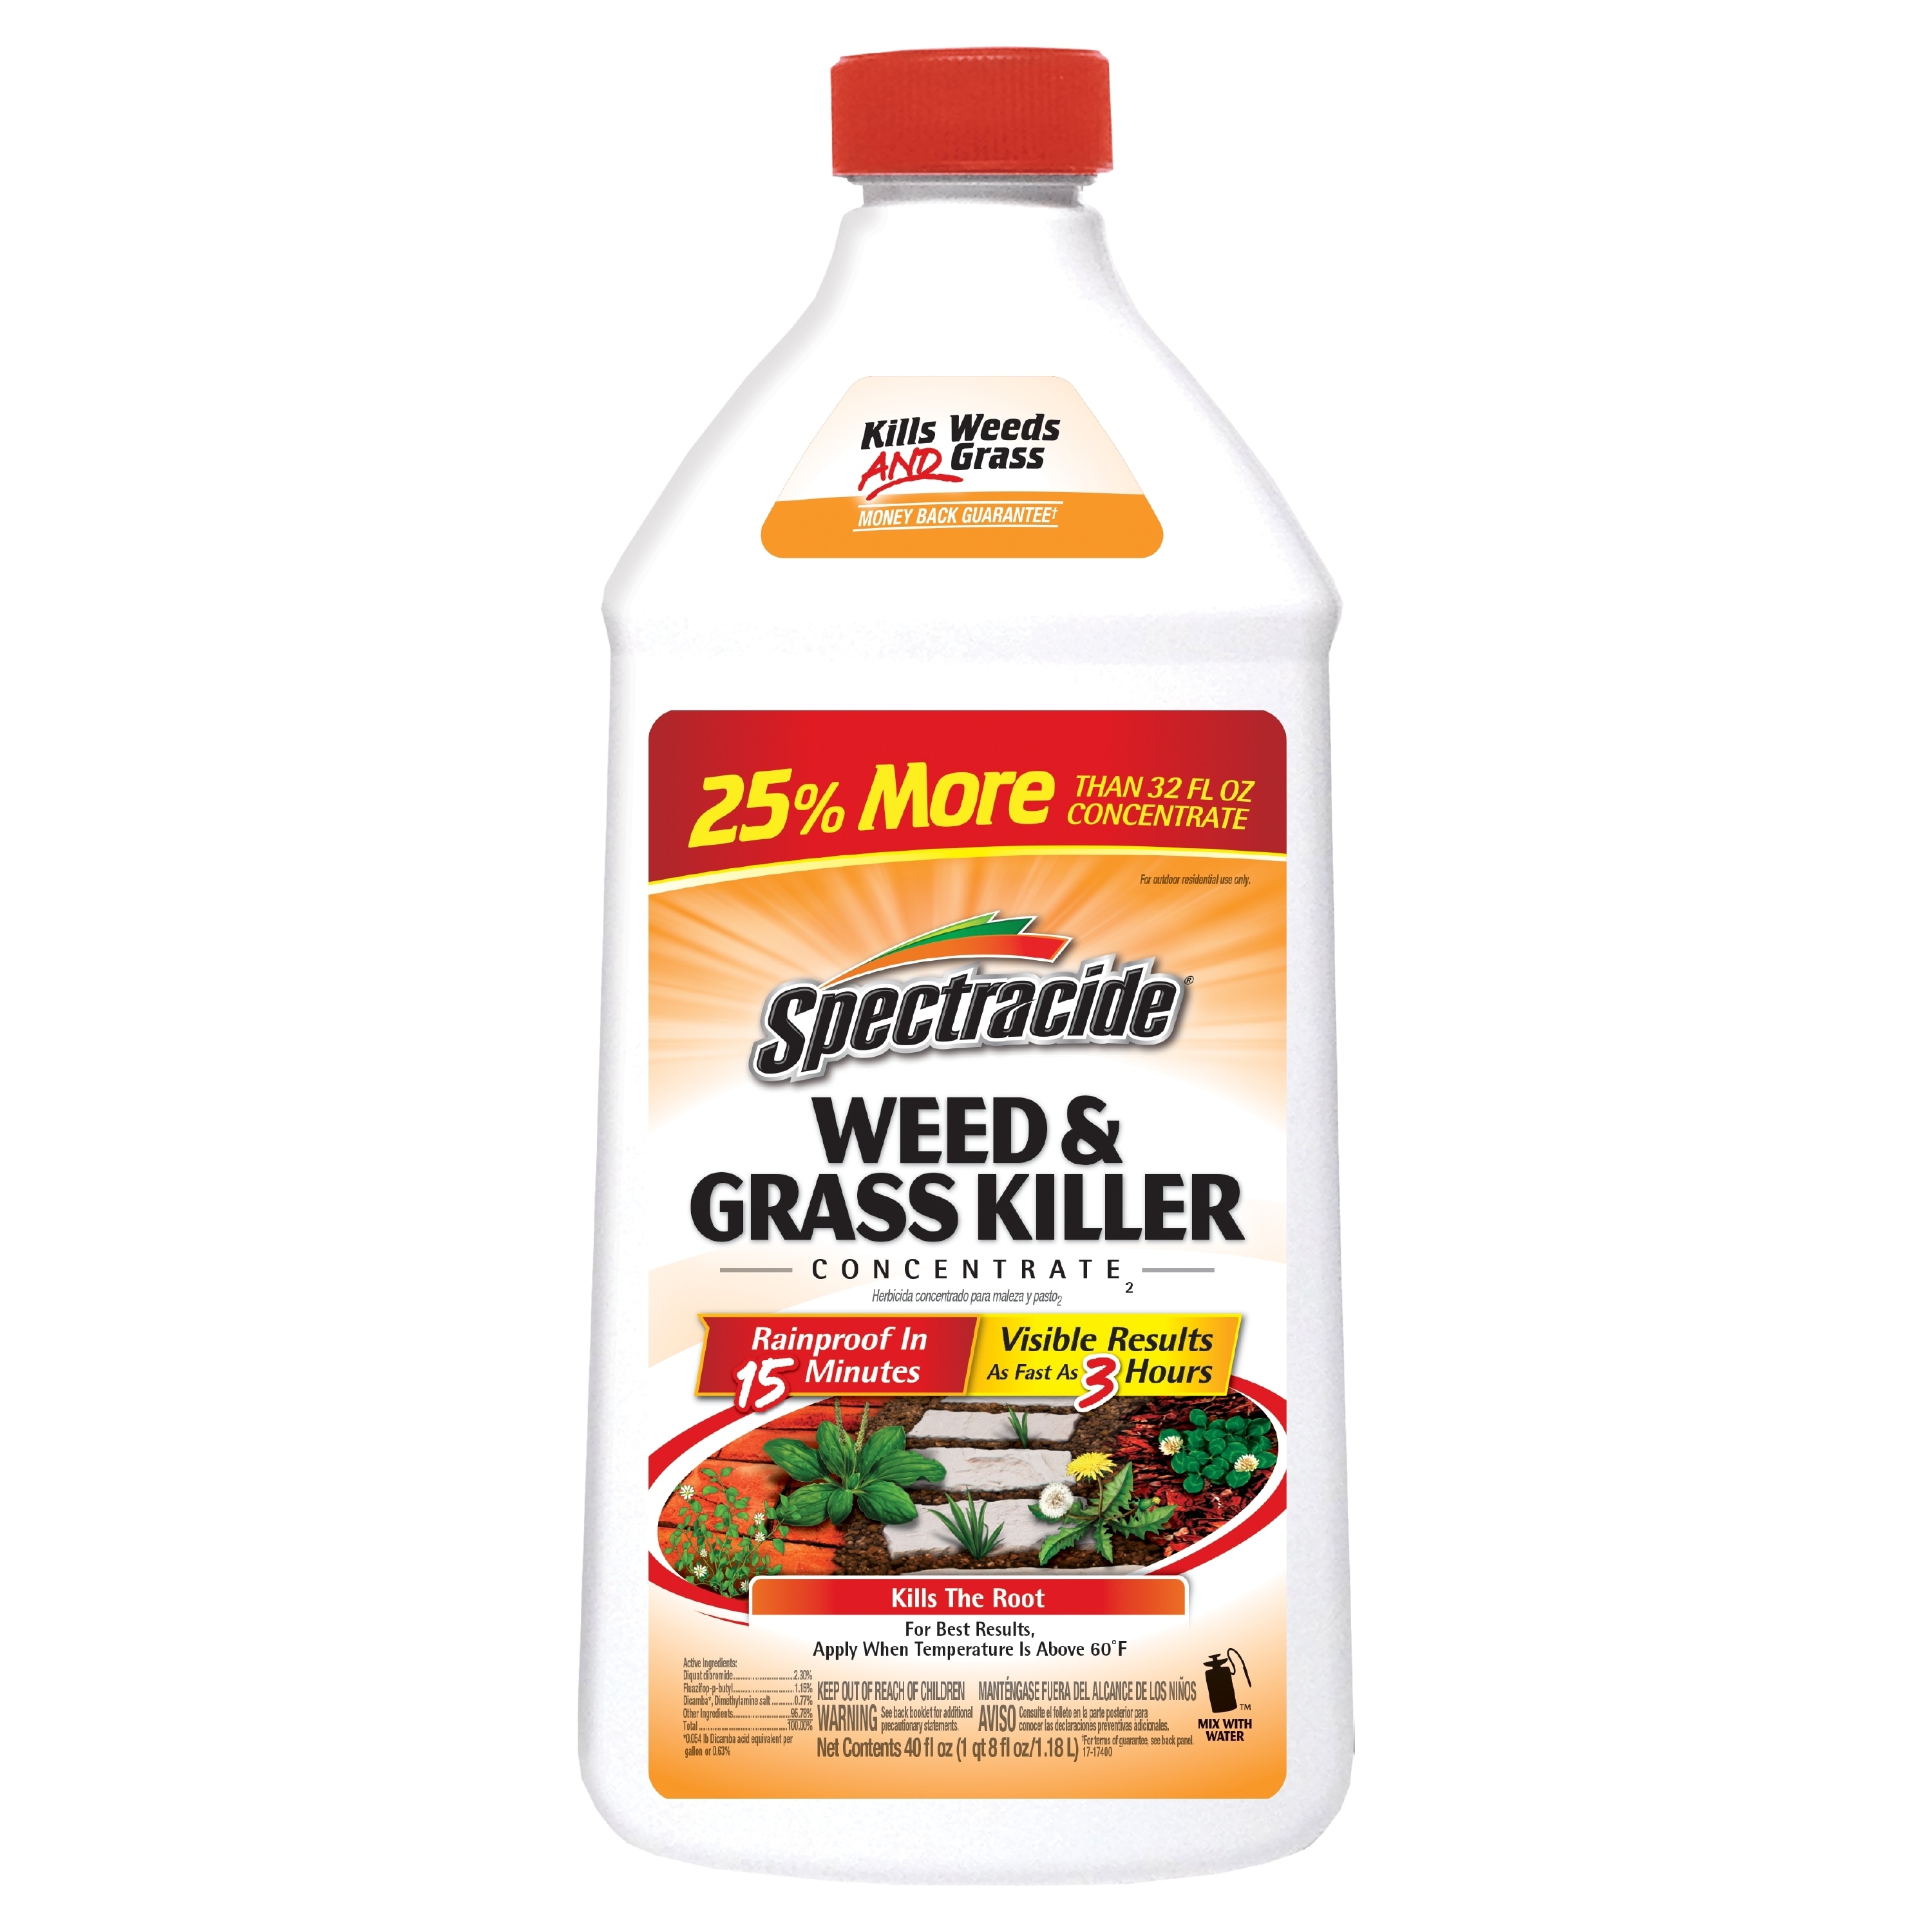 Image of Spectracide Weed & Grass Killer Concentrate